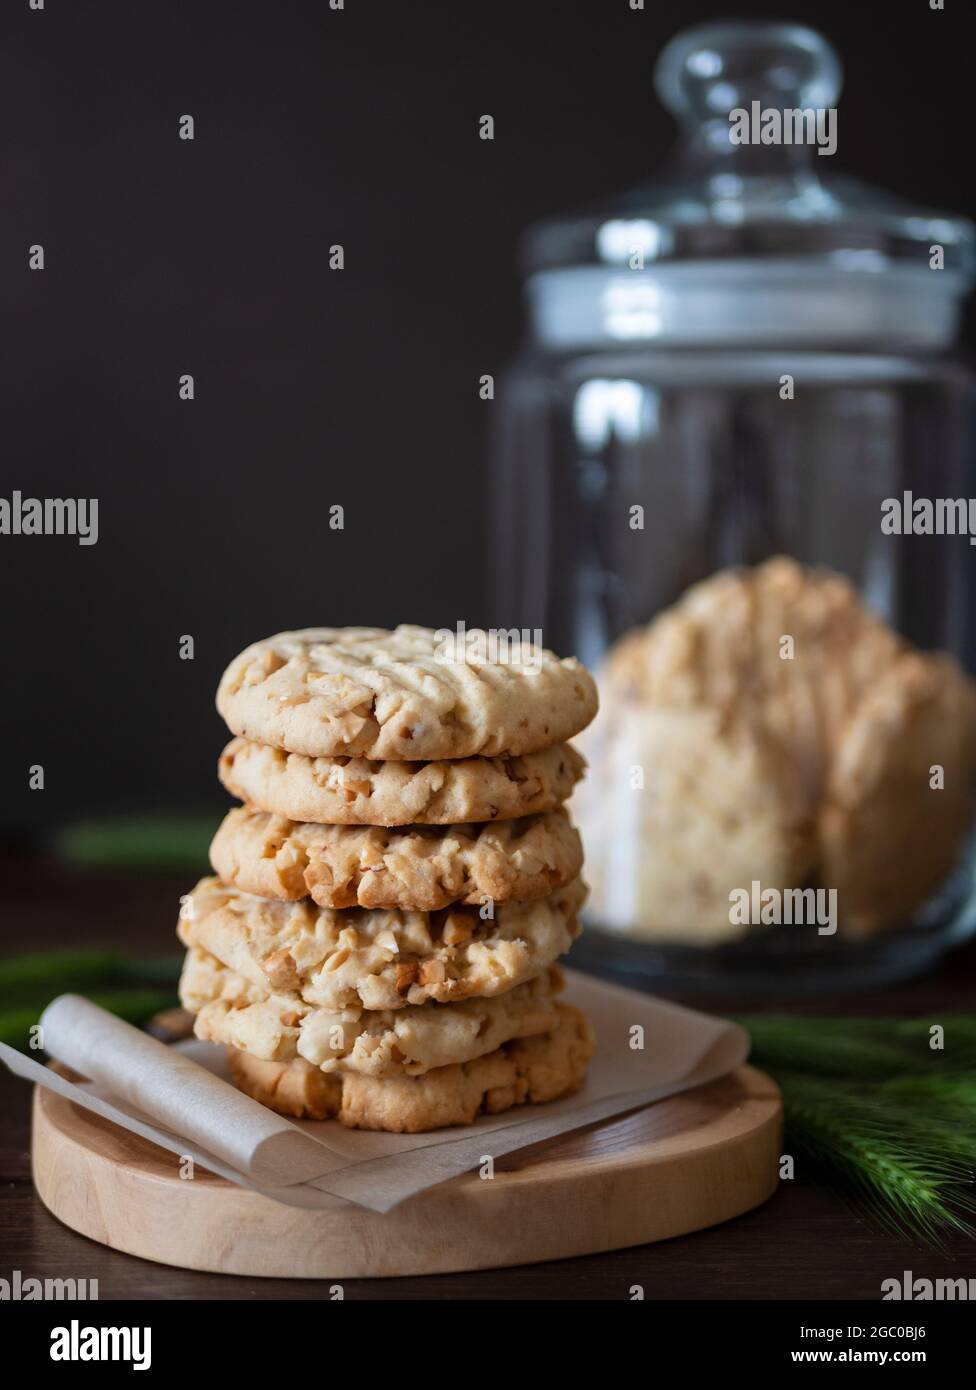 Homemade nut cookies on a wooden board, spikelets and a glass biscuit jar on the background. Upright format Stock Photo